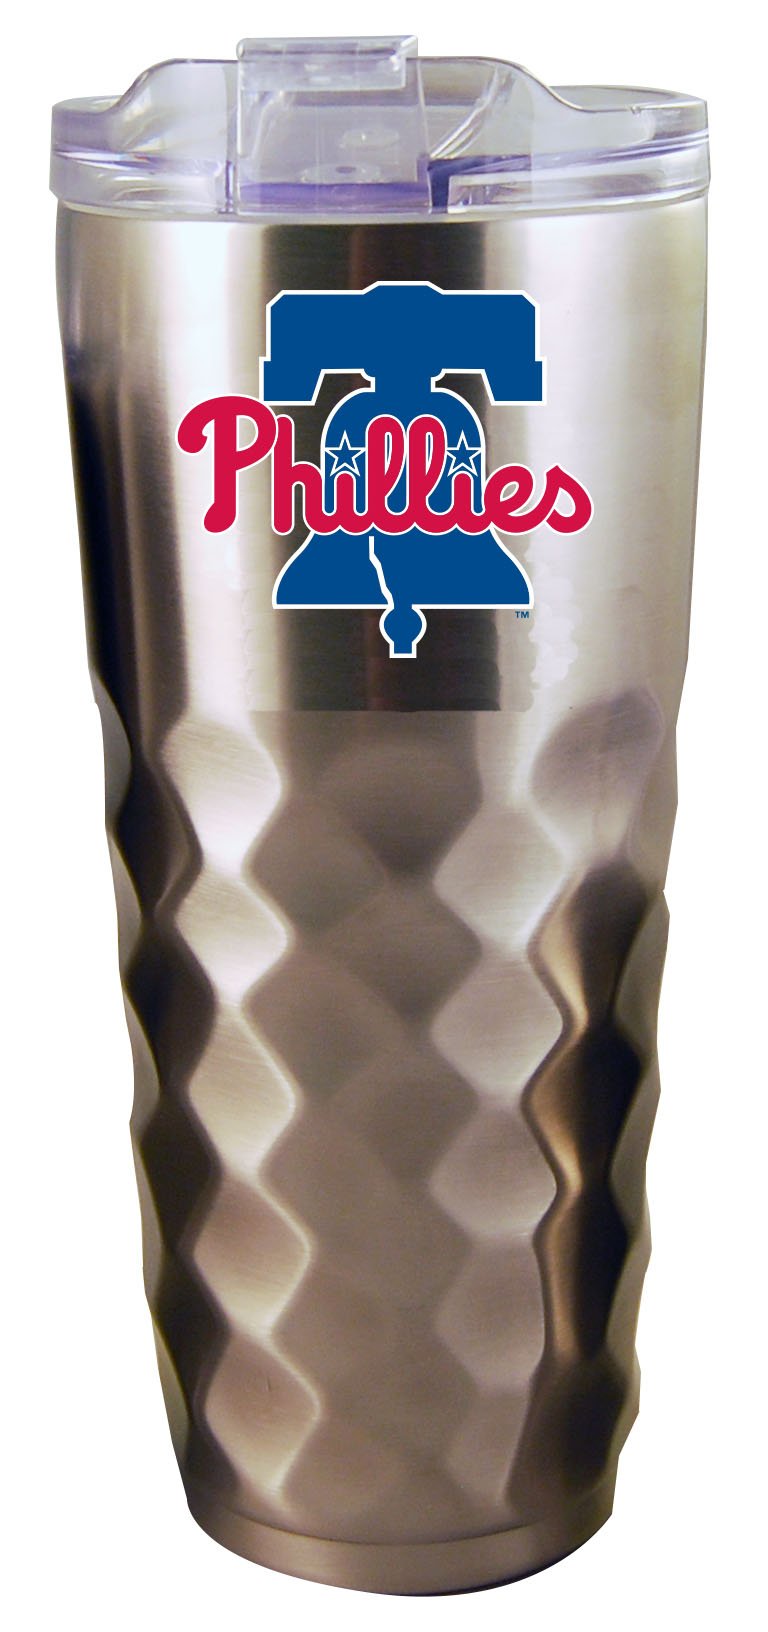 32OZ SS DIAMD TMBLR PHILLIES
CurrentProduct, Drinkware_category_All, MLB, Philadelphia Phillies, PPH
The Memory Company